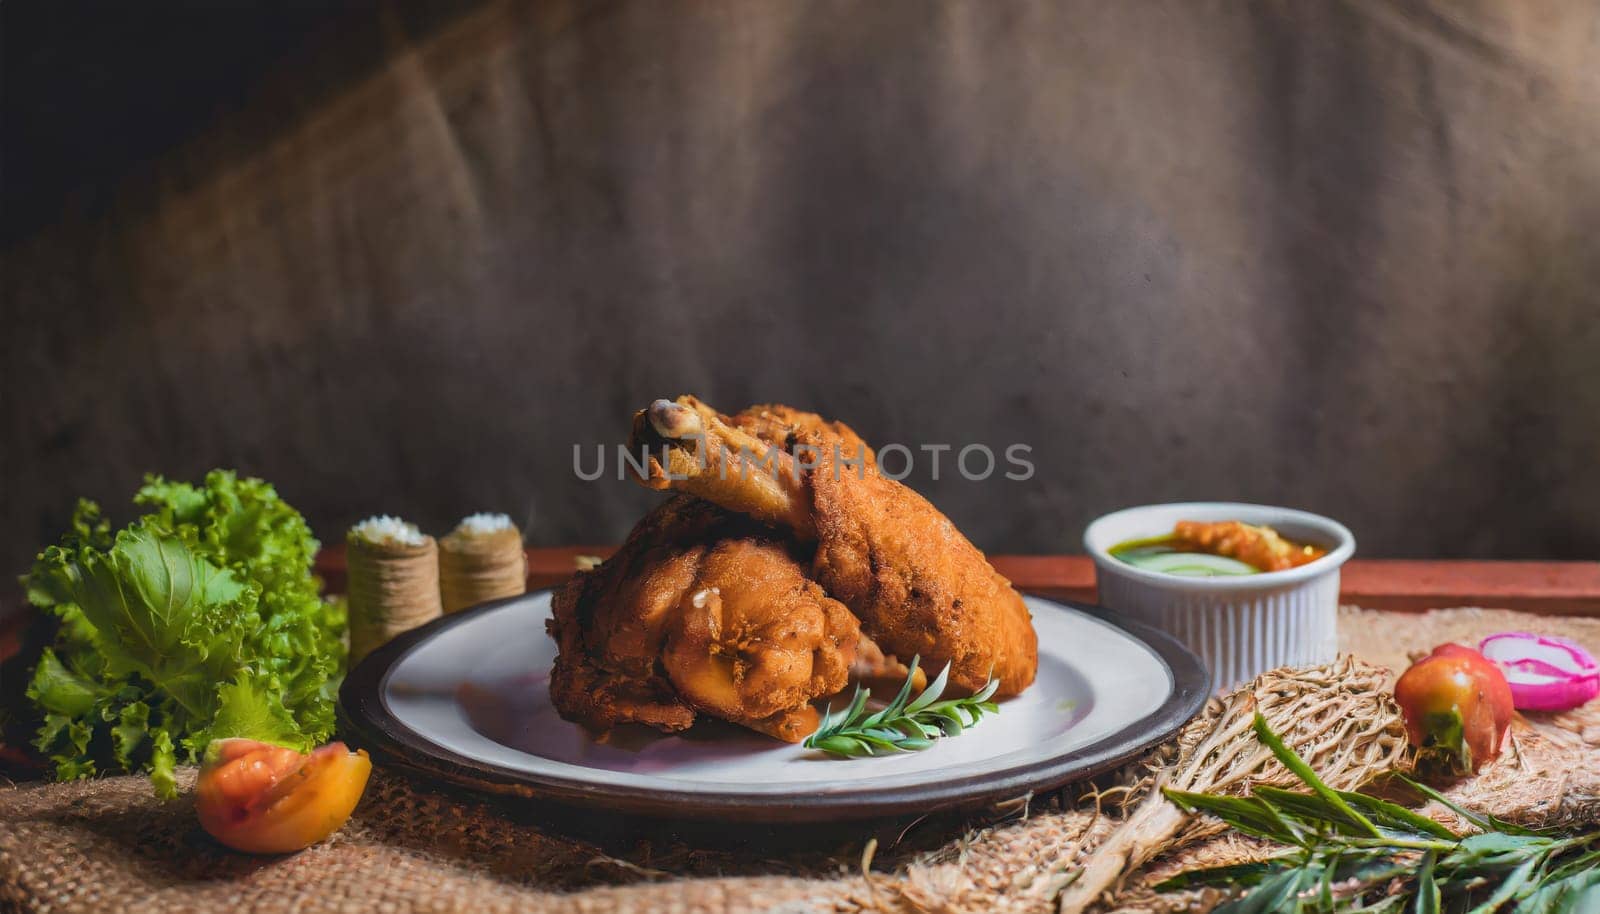 Copy Space image of Fried and Crispy Chicken Gizzards on a Rustic Wooden Table with landscape view